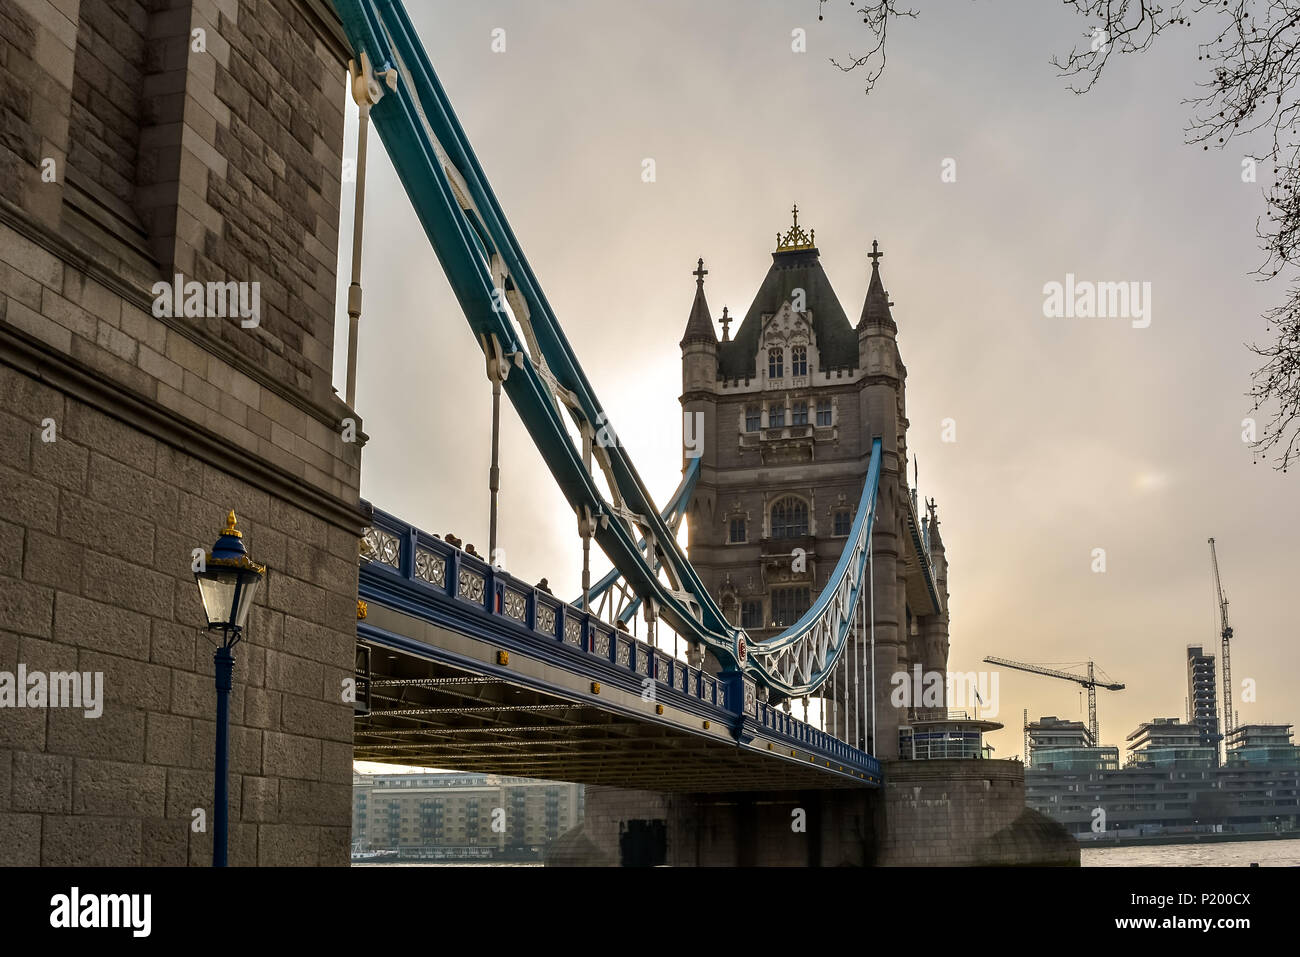 Low angle view of the Tower bridge, London with vintage street lamp. The bascule and suspension bridge crosses the River Thames and has become an icon Stock Photo